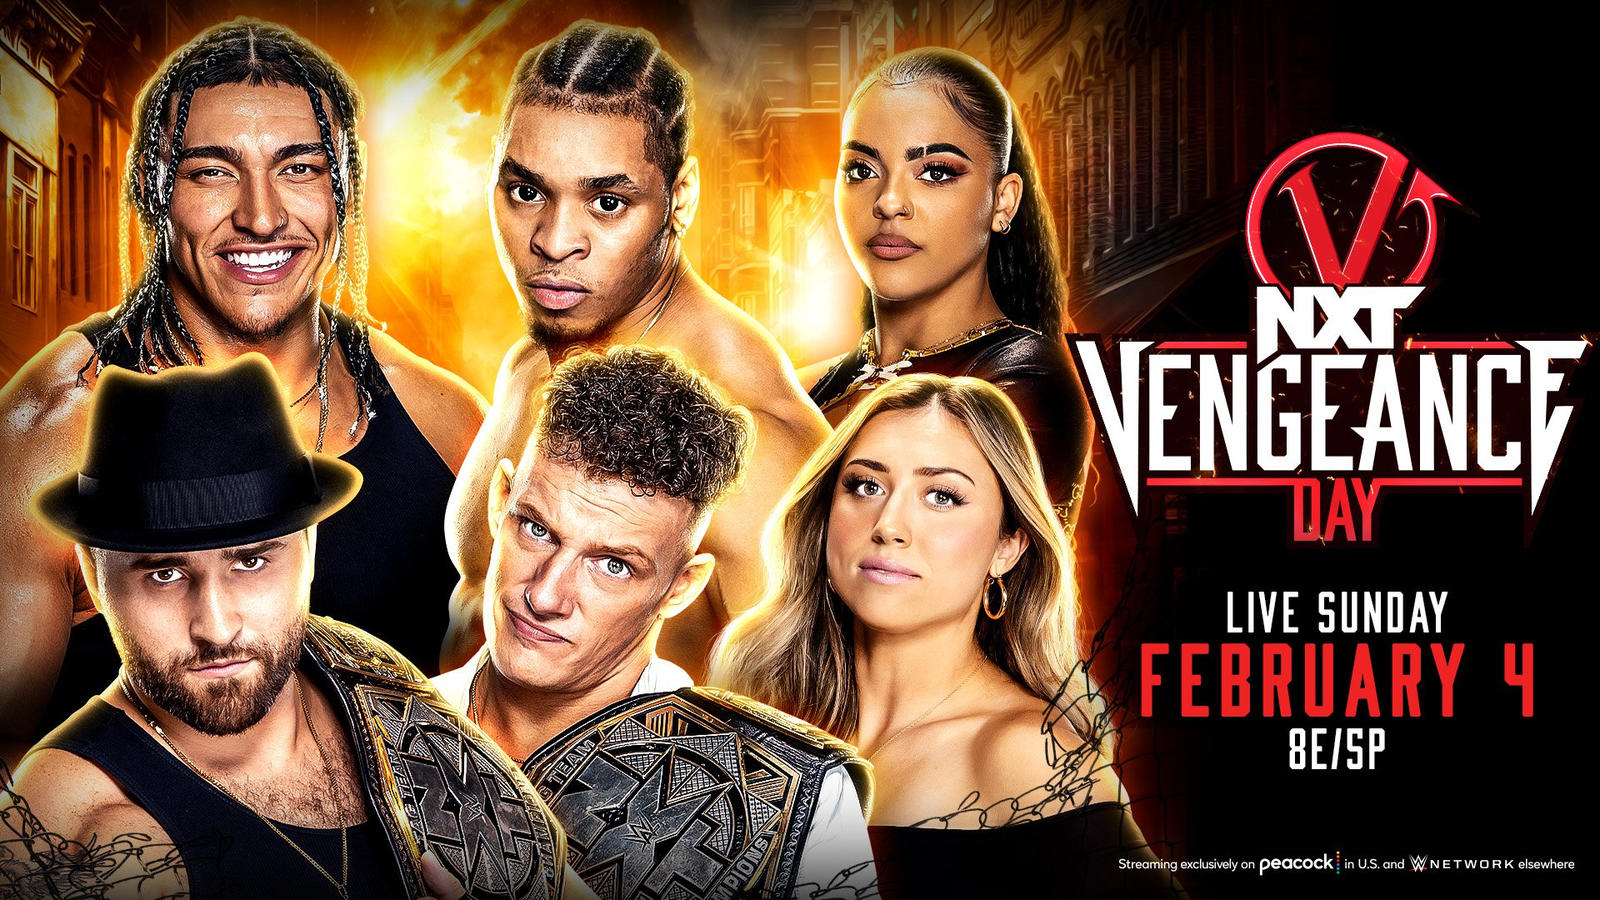 SixPerson Tag Team Match Added To NXT Vengeance Day Diva Dirt